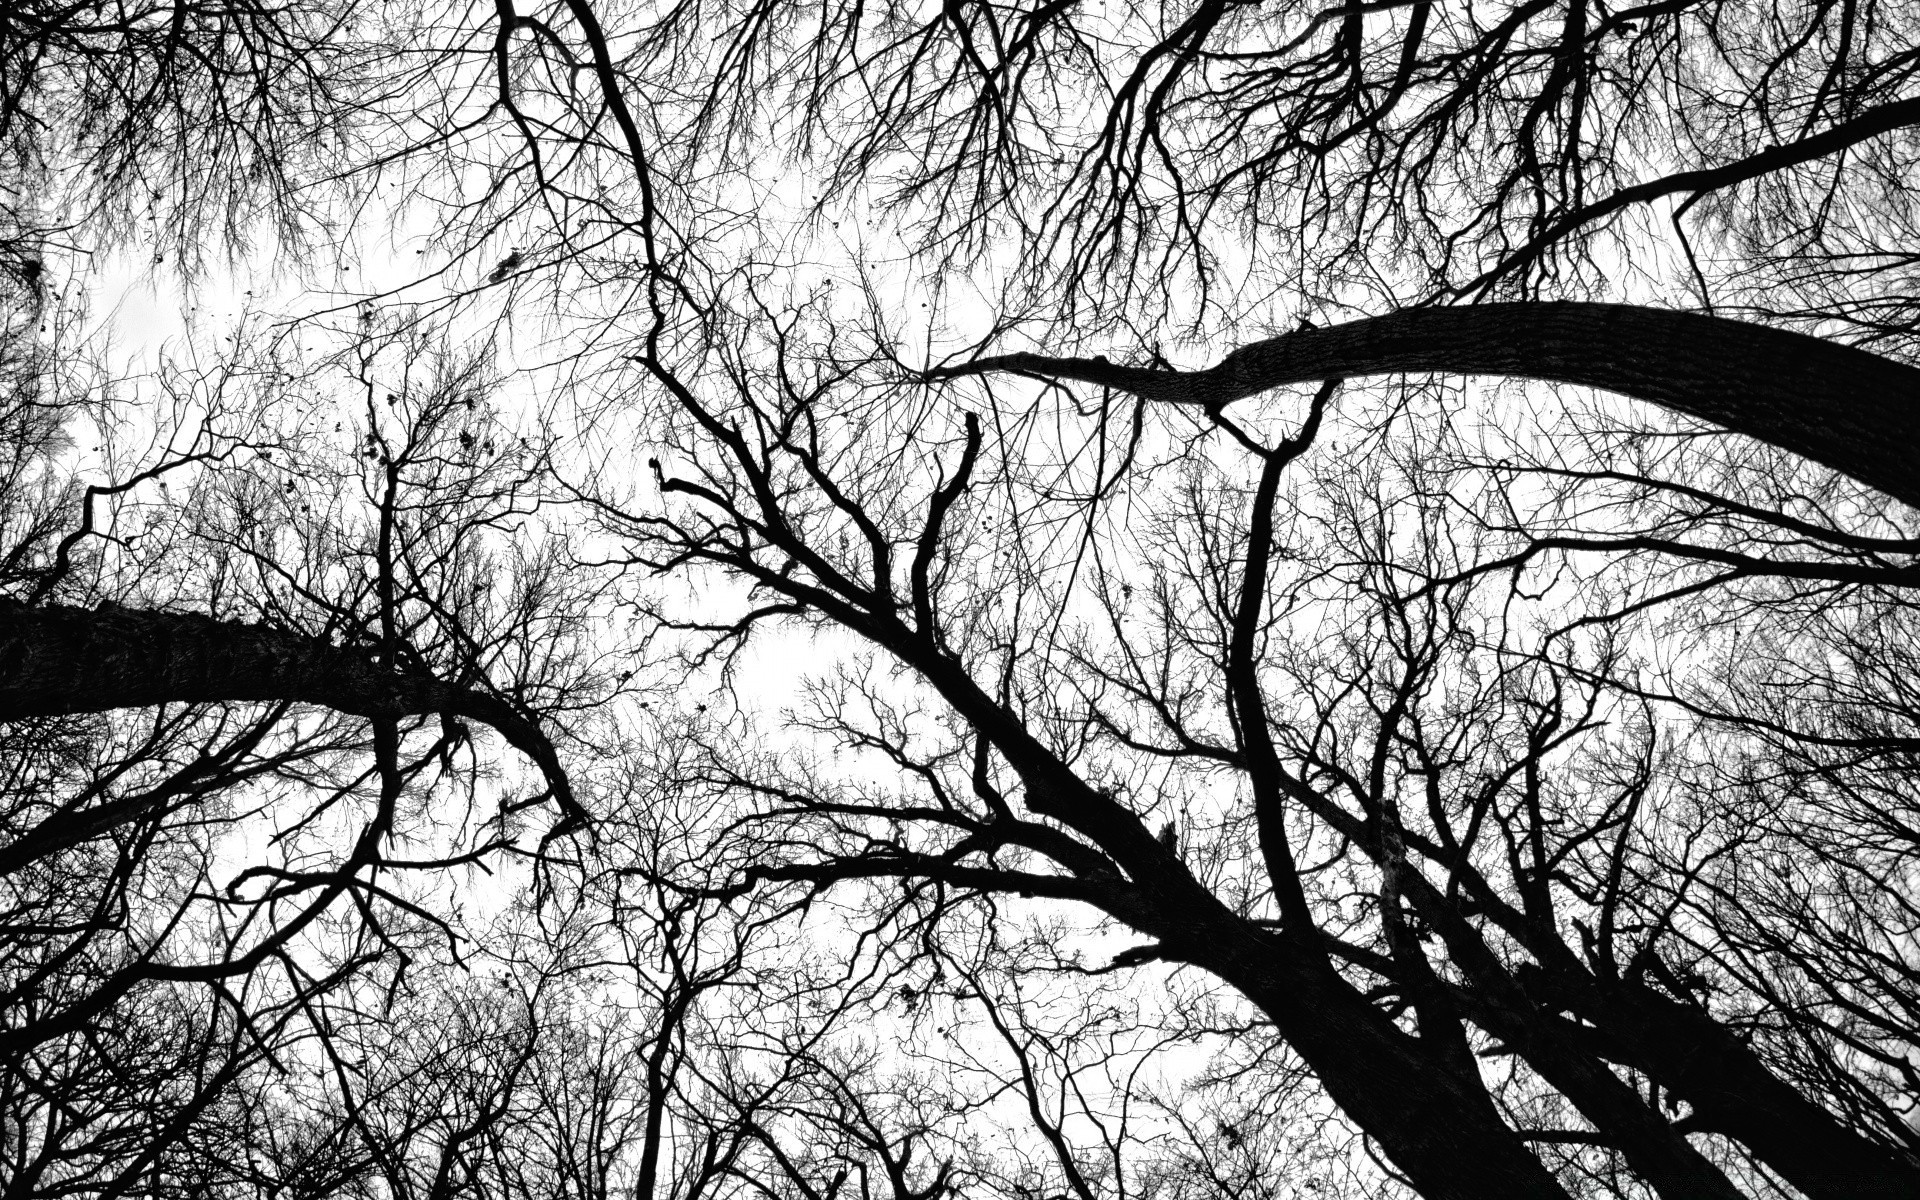 black and white tree branch wood trunk landscape season park nature dawn winter fall leaf environment oak weather backlit alone silhouette scenery